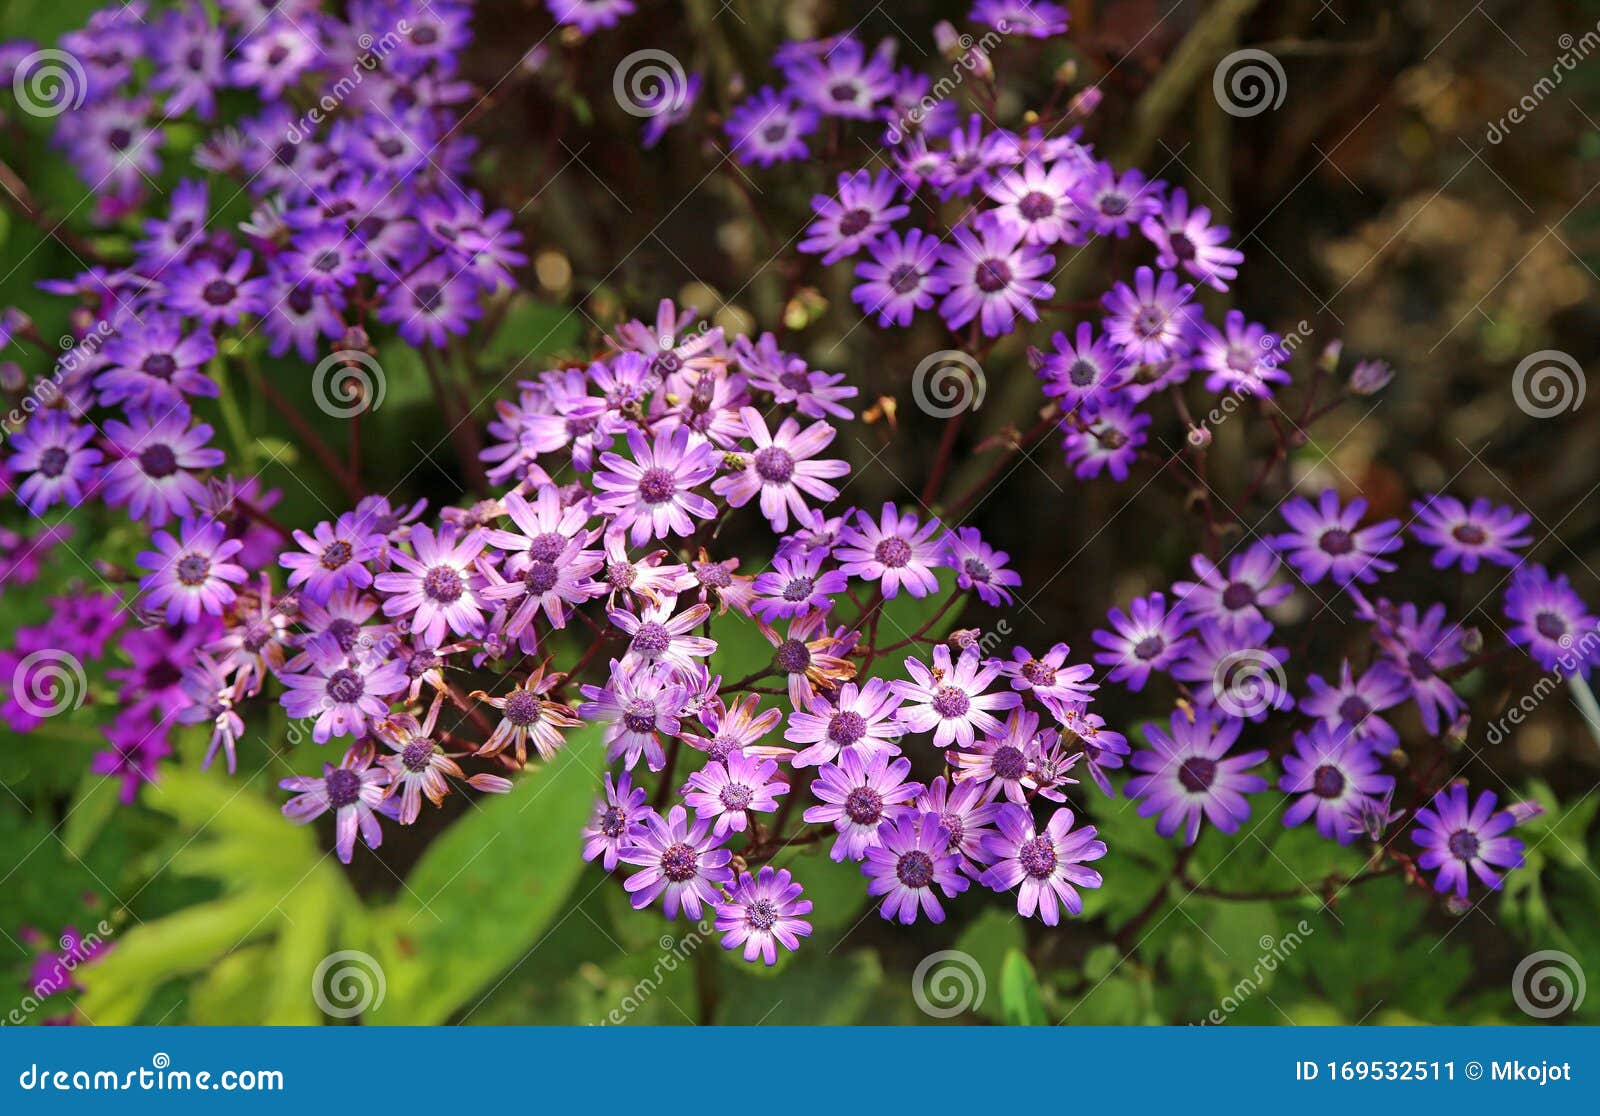 Purple Aster Flowers Stock Image Image Of Botany Spring 169532511